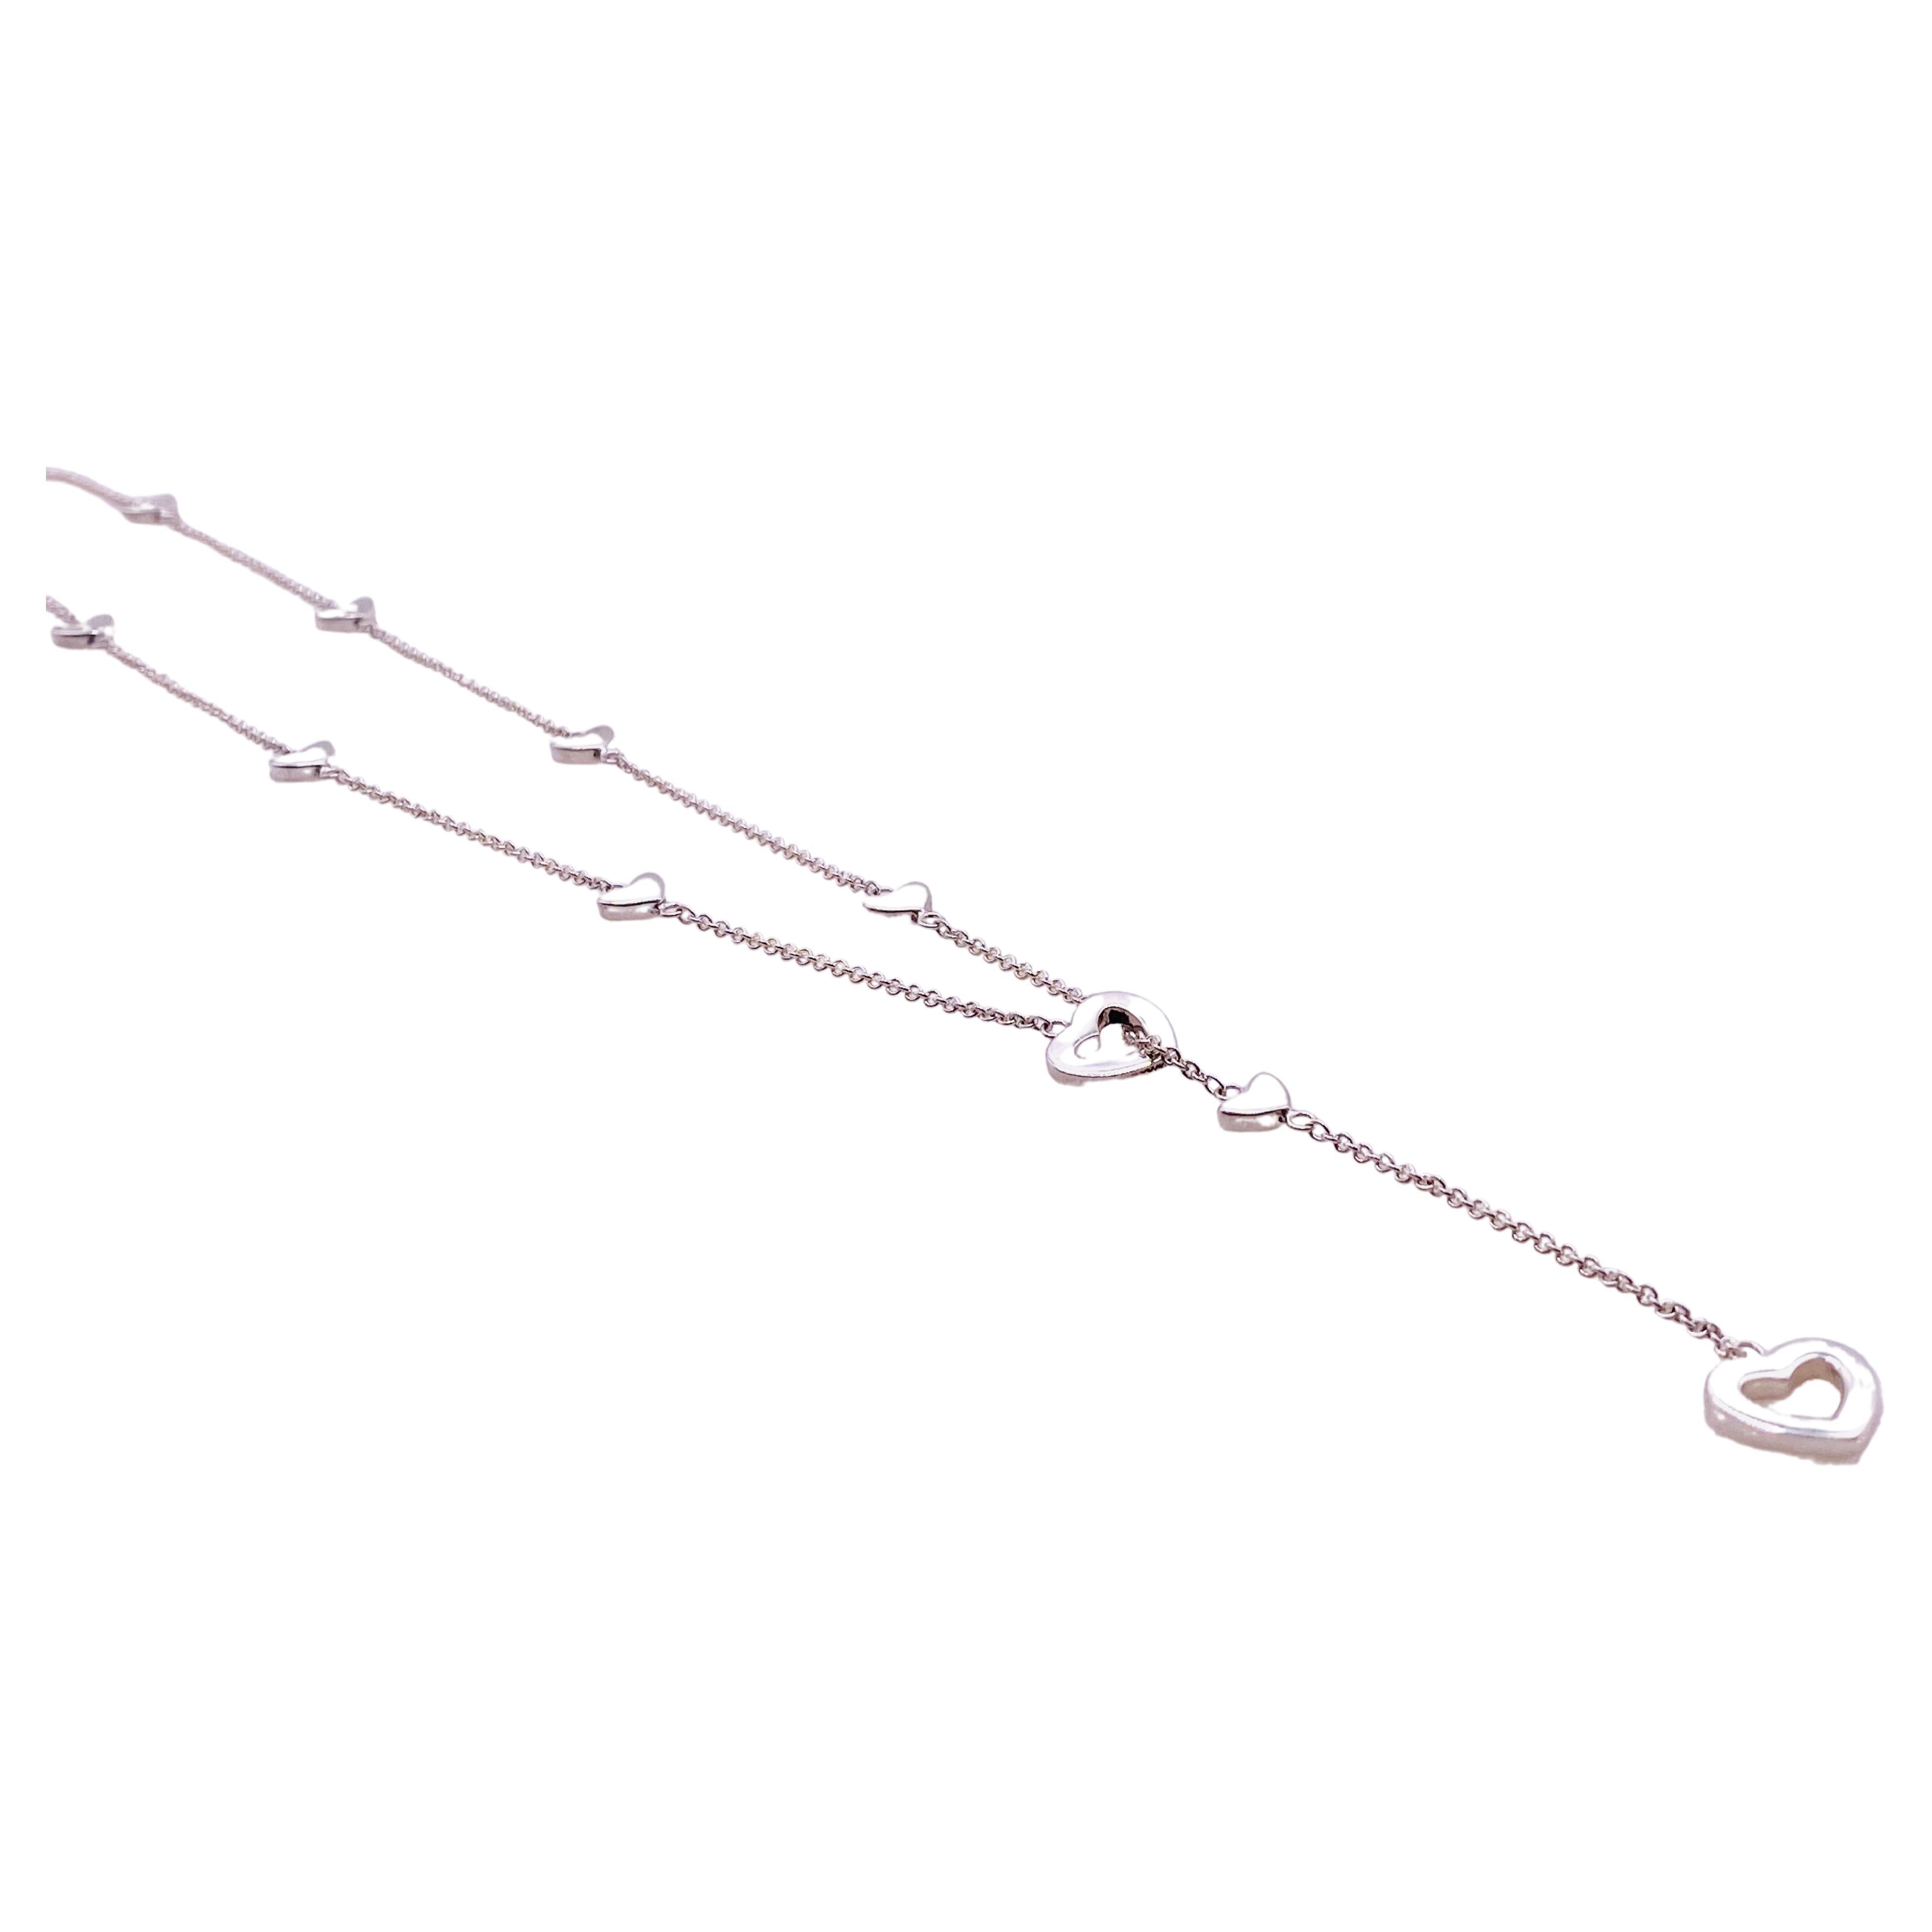 Tiffany & Co. Sterling Silver Heart Lariat Necklace